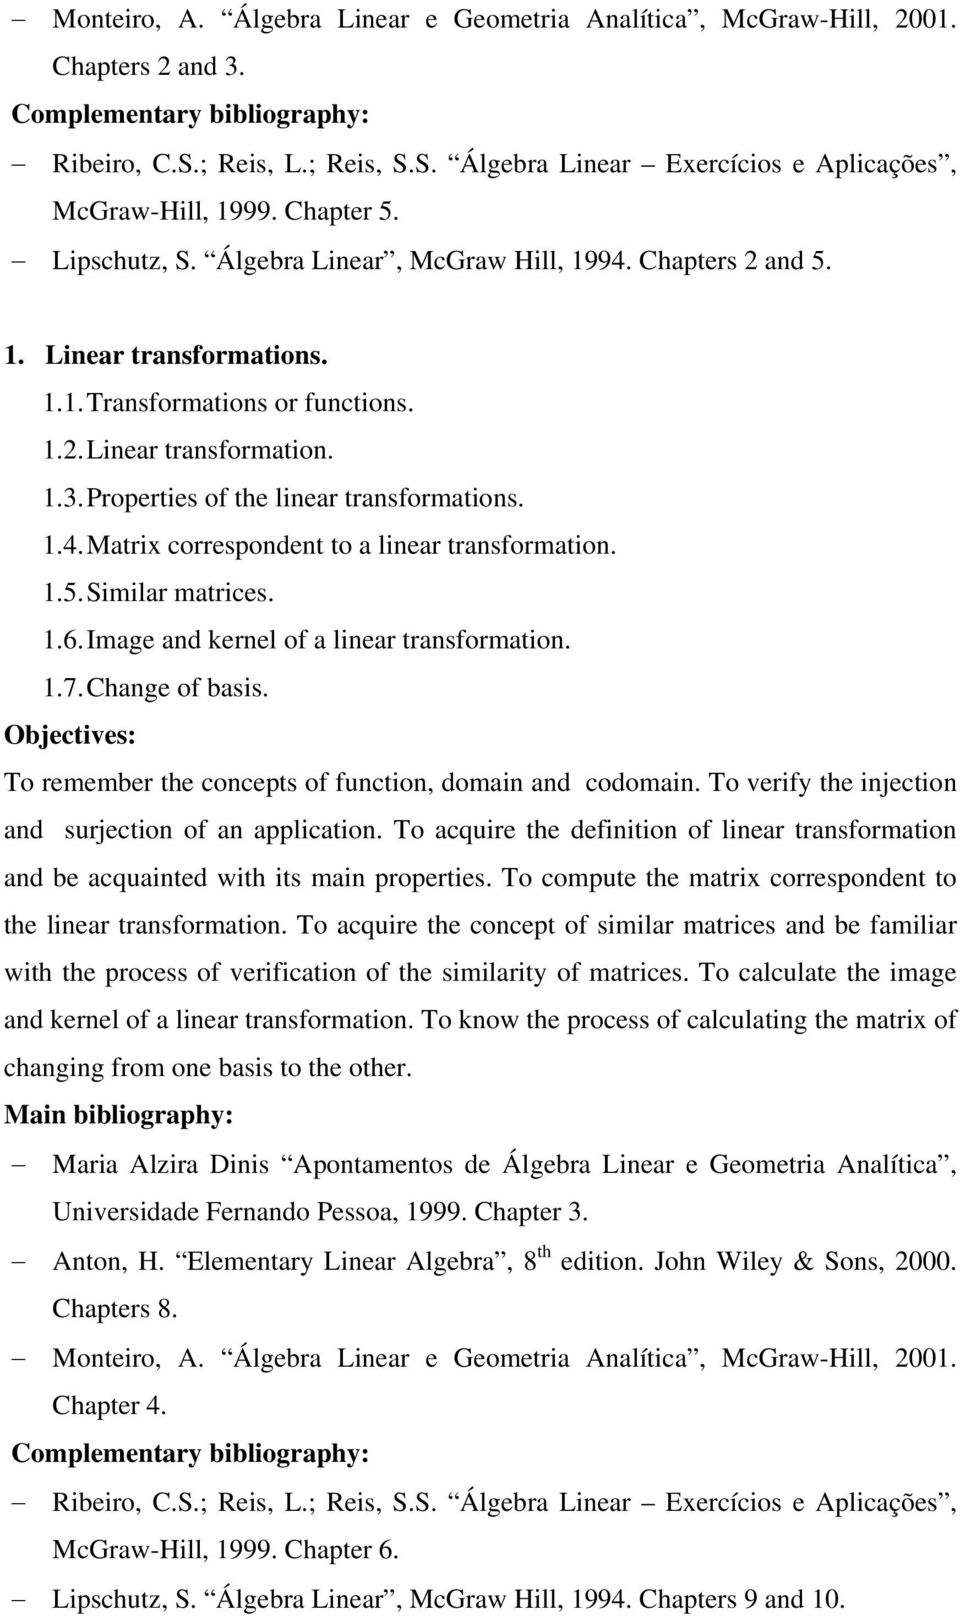 Image and kernel of a linear transformation. 1.7. Change of basis. Objectives: To remember the concepts of function, domain and codomain. To verify the injection and surjection of an application.